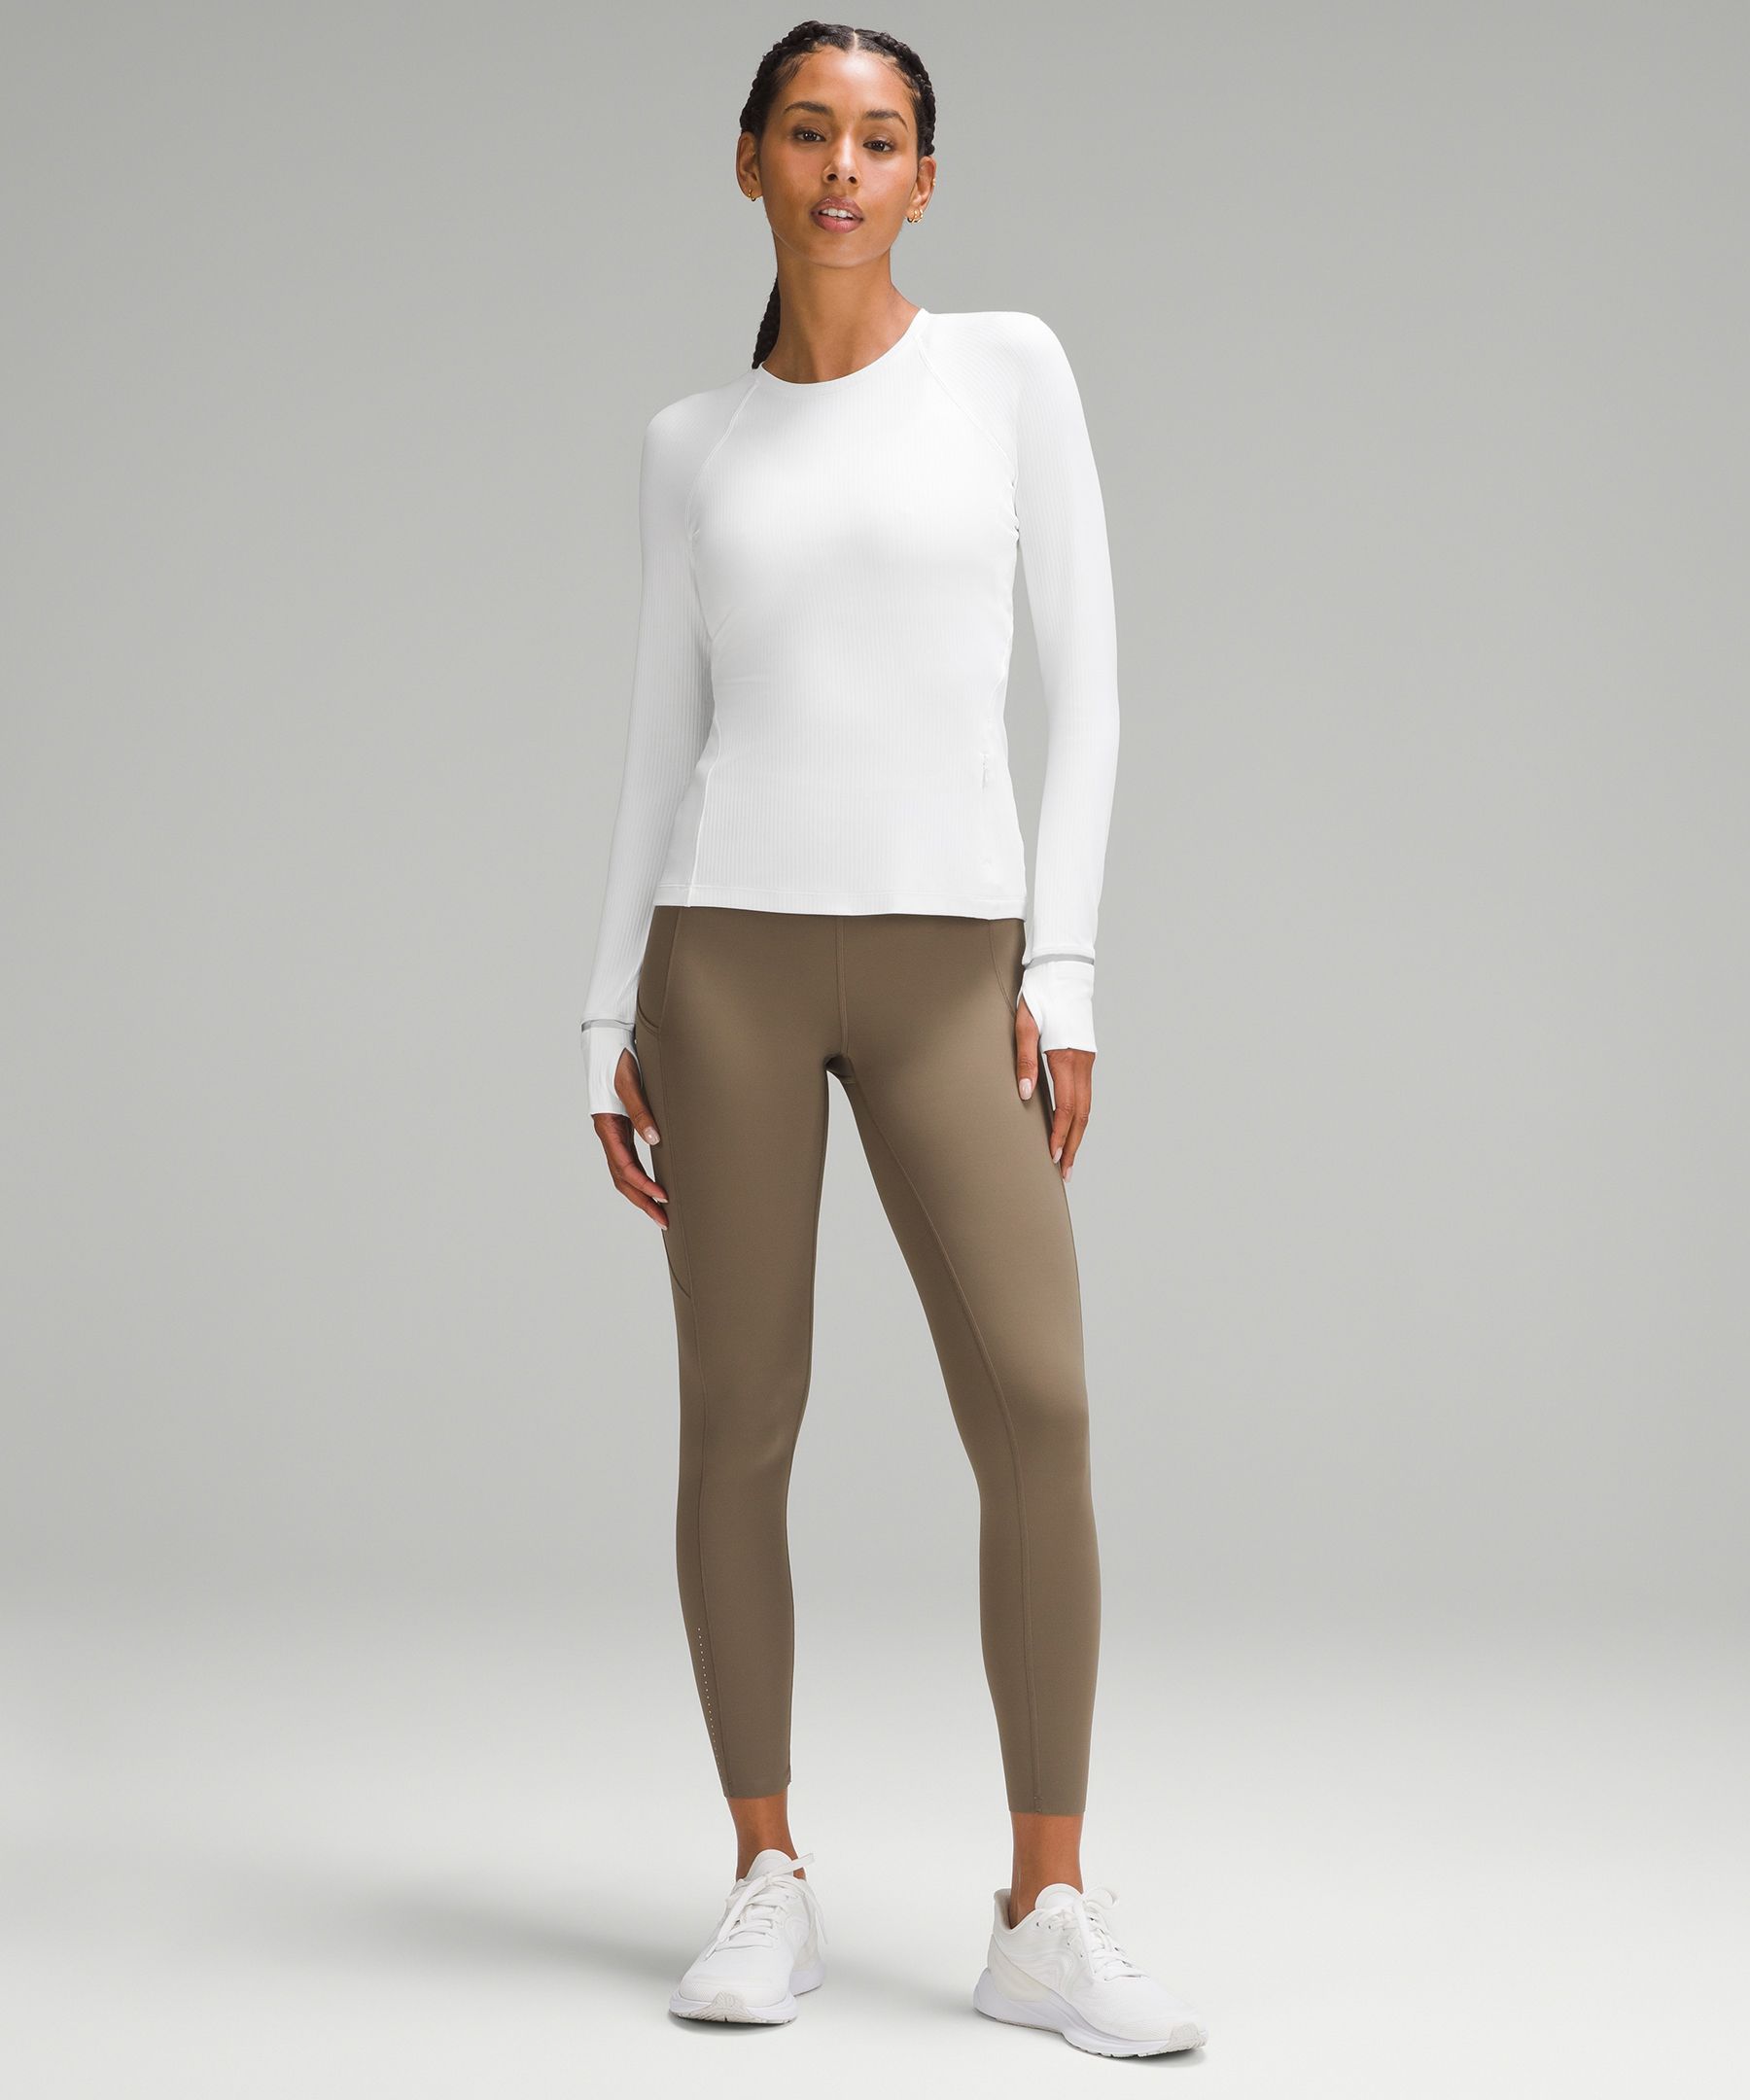 My Casual Mom - This classic soft Rulu Run top just dropped to sale🙏FREE  shipping at Lululemon! Rulu run long sleeve top-   ❤️Shop ALL the woman Lululemon we  made too much